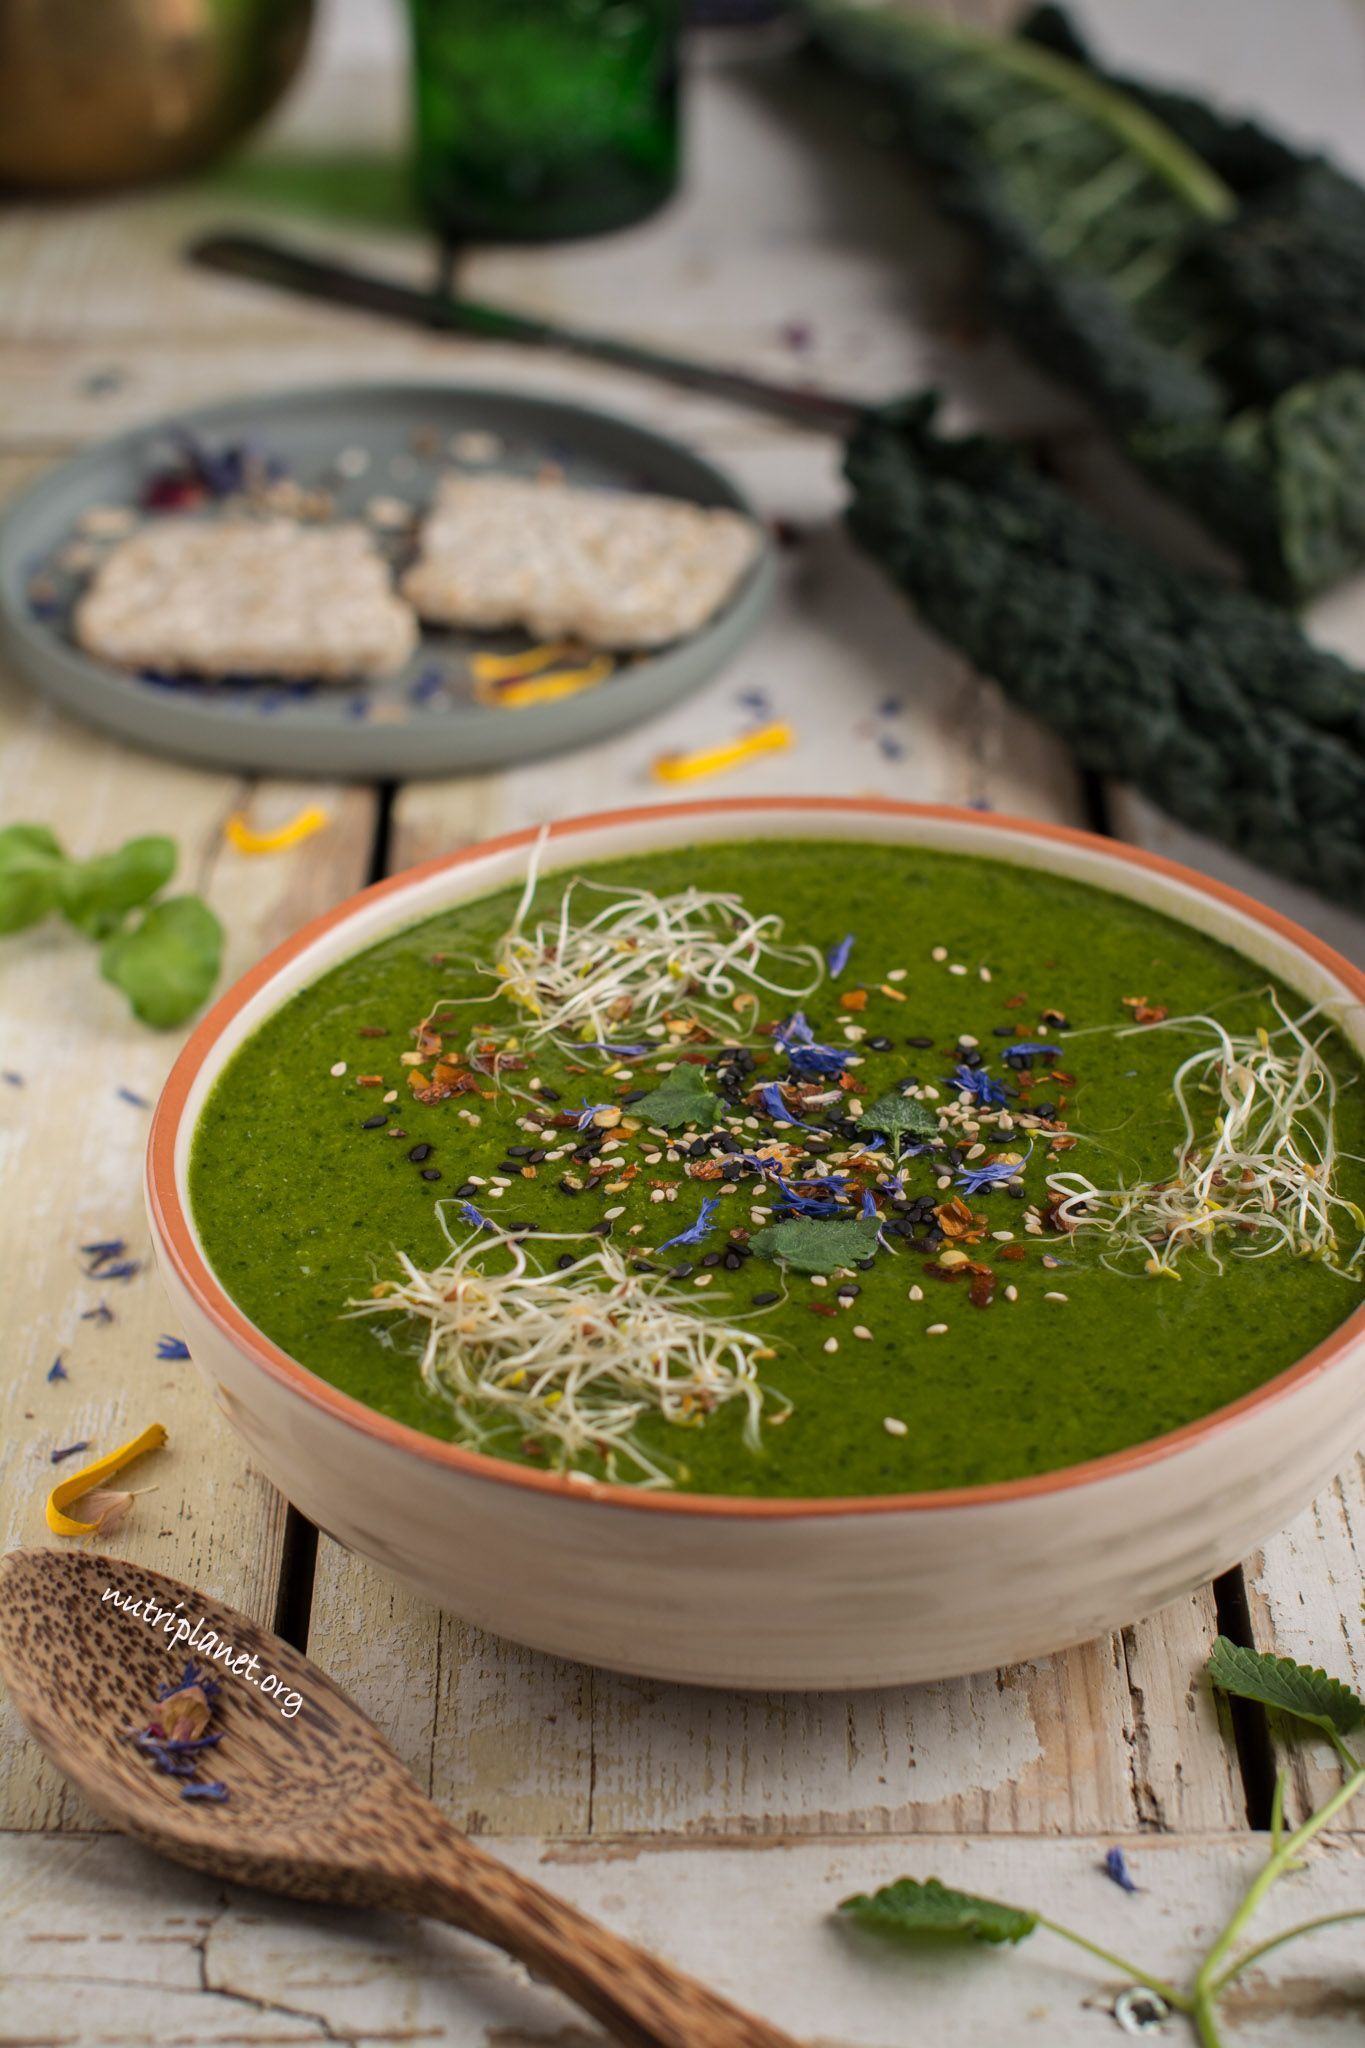 Creamy Vegan Soup with Peas, Broccoli and Kale -   14 candida diet soup
 ideas